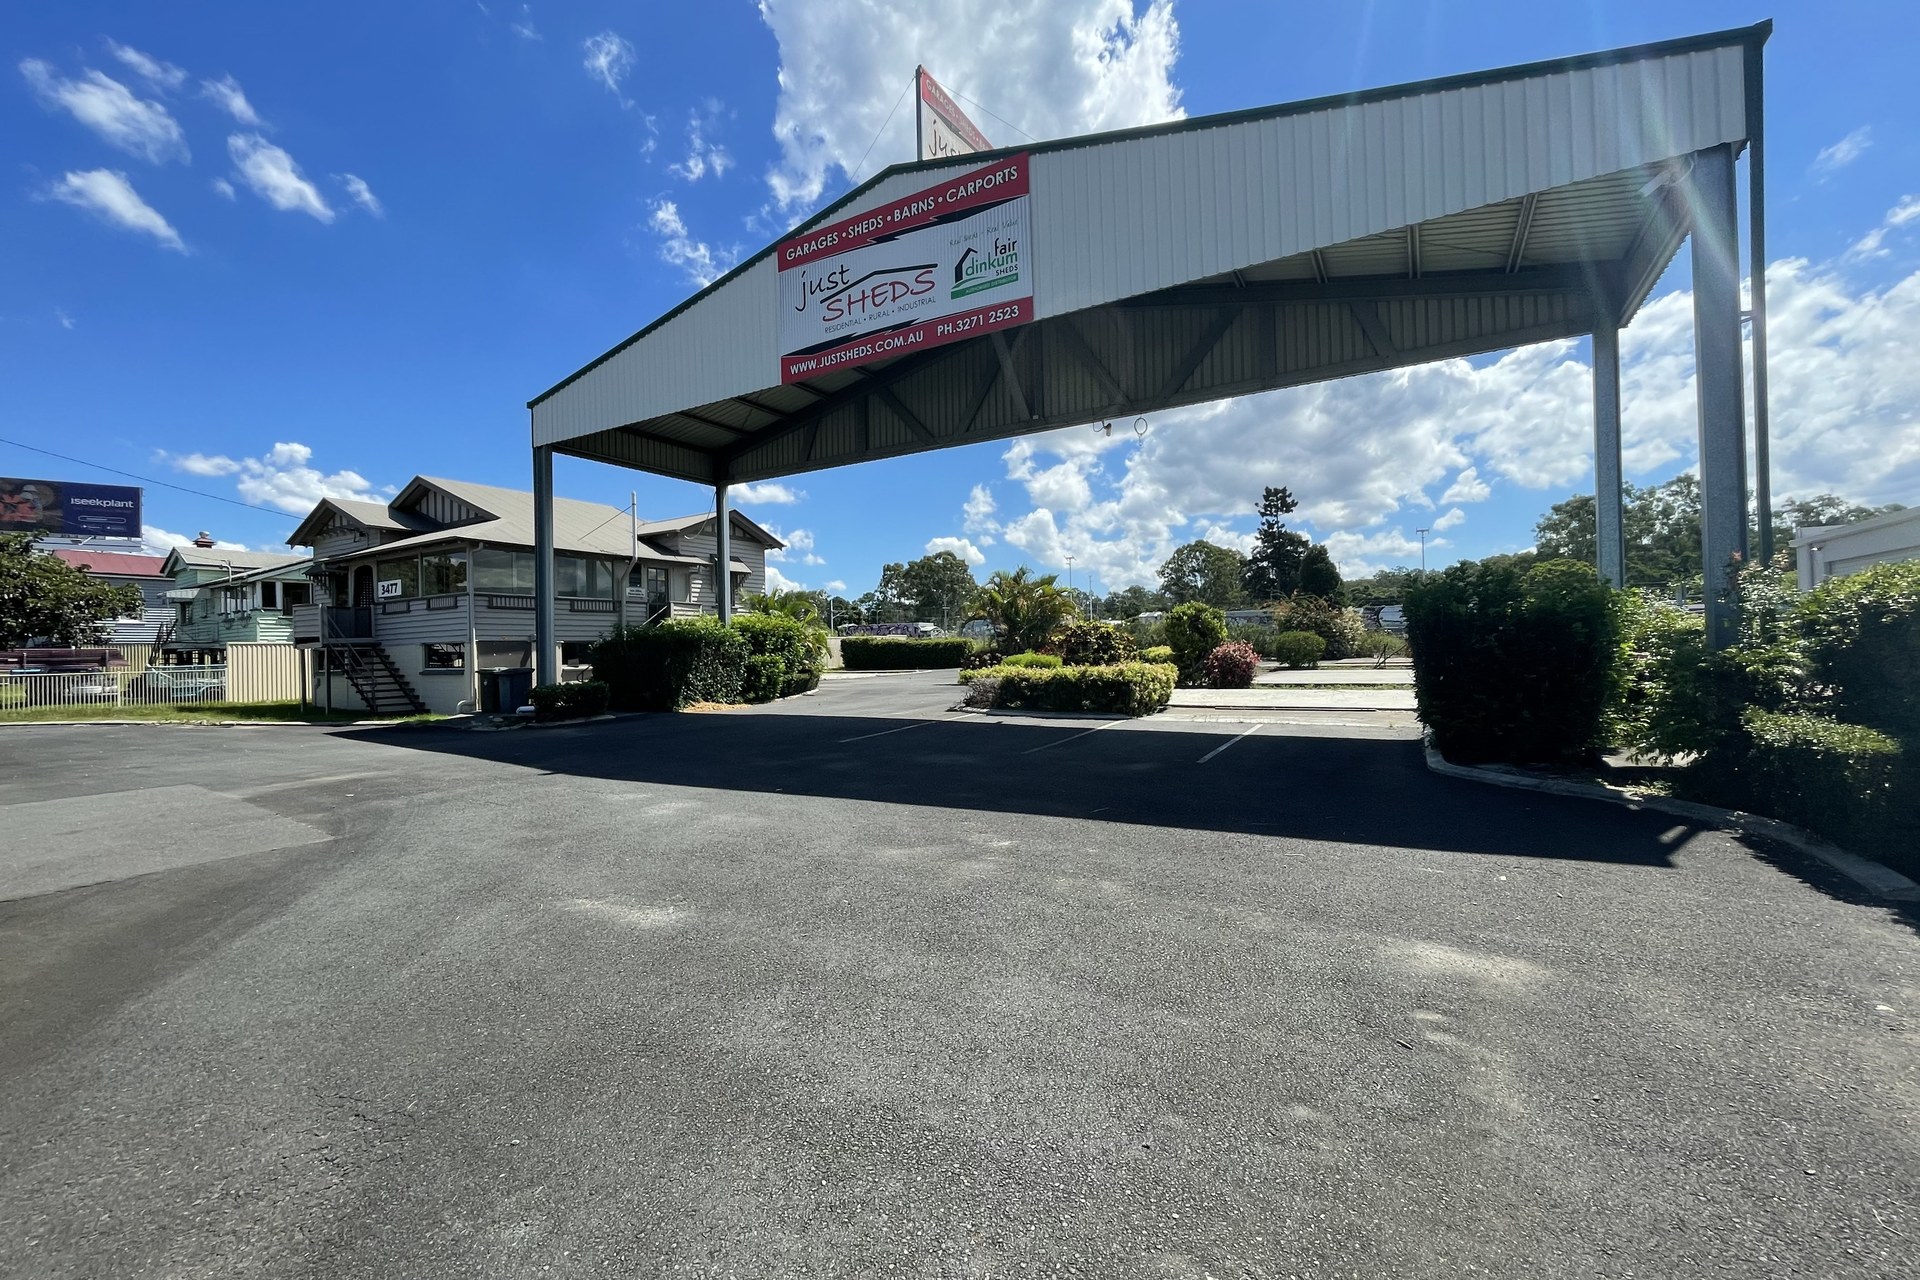 3477 Ipswich Road, Wacol QLD 4076 - Chase Commercial Real Estate Brisbane